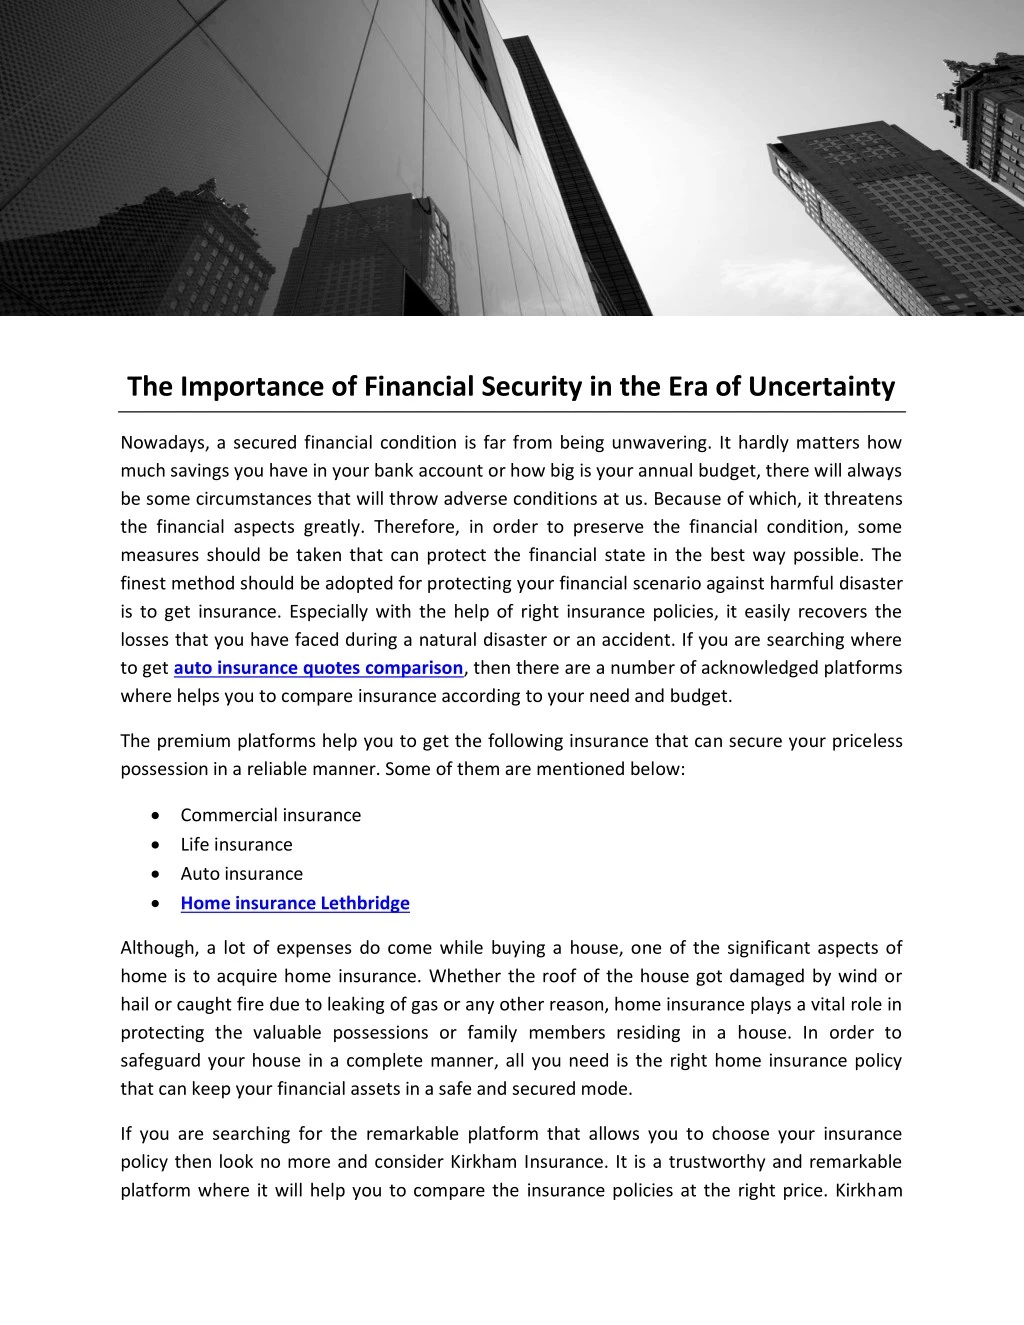 the importance of financial security